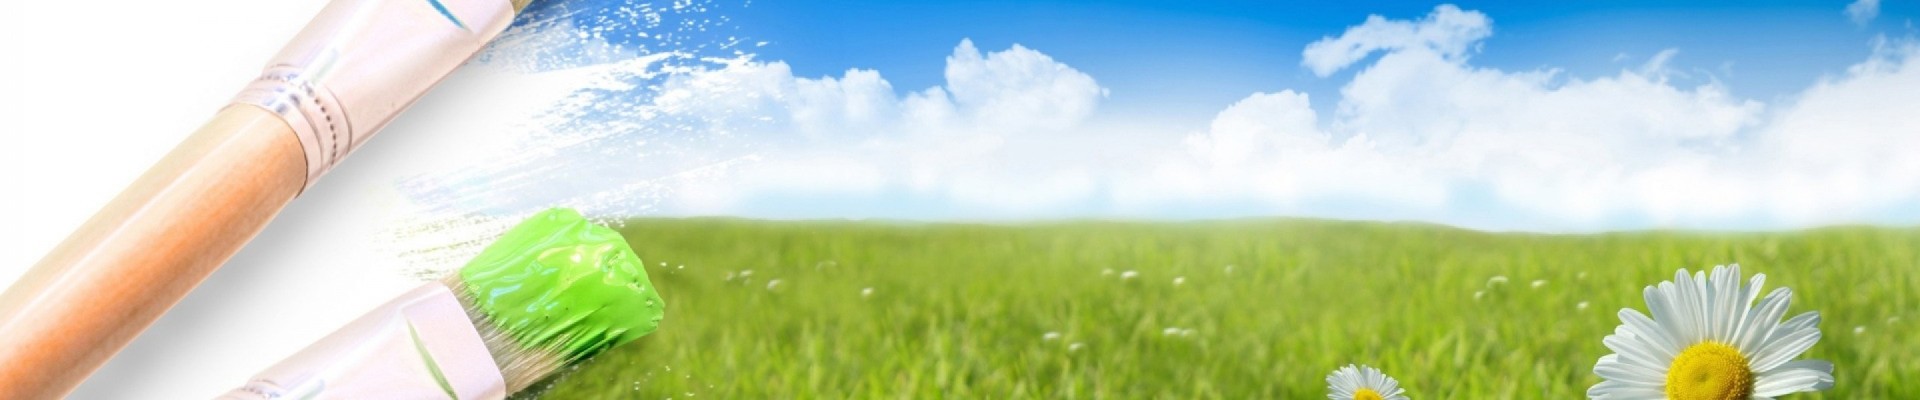 unleash-your-imagination-beautiful-blue-clouds-field-flowers-grass-green-imagination-paint-painting-sky-white-900x2880